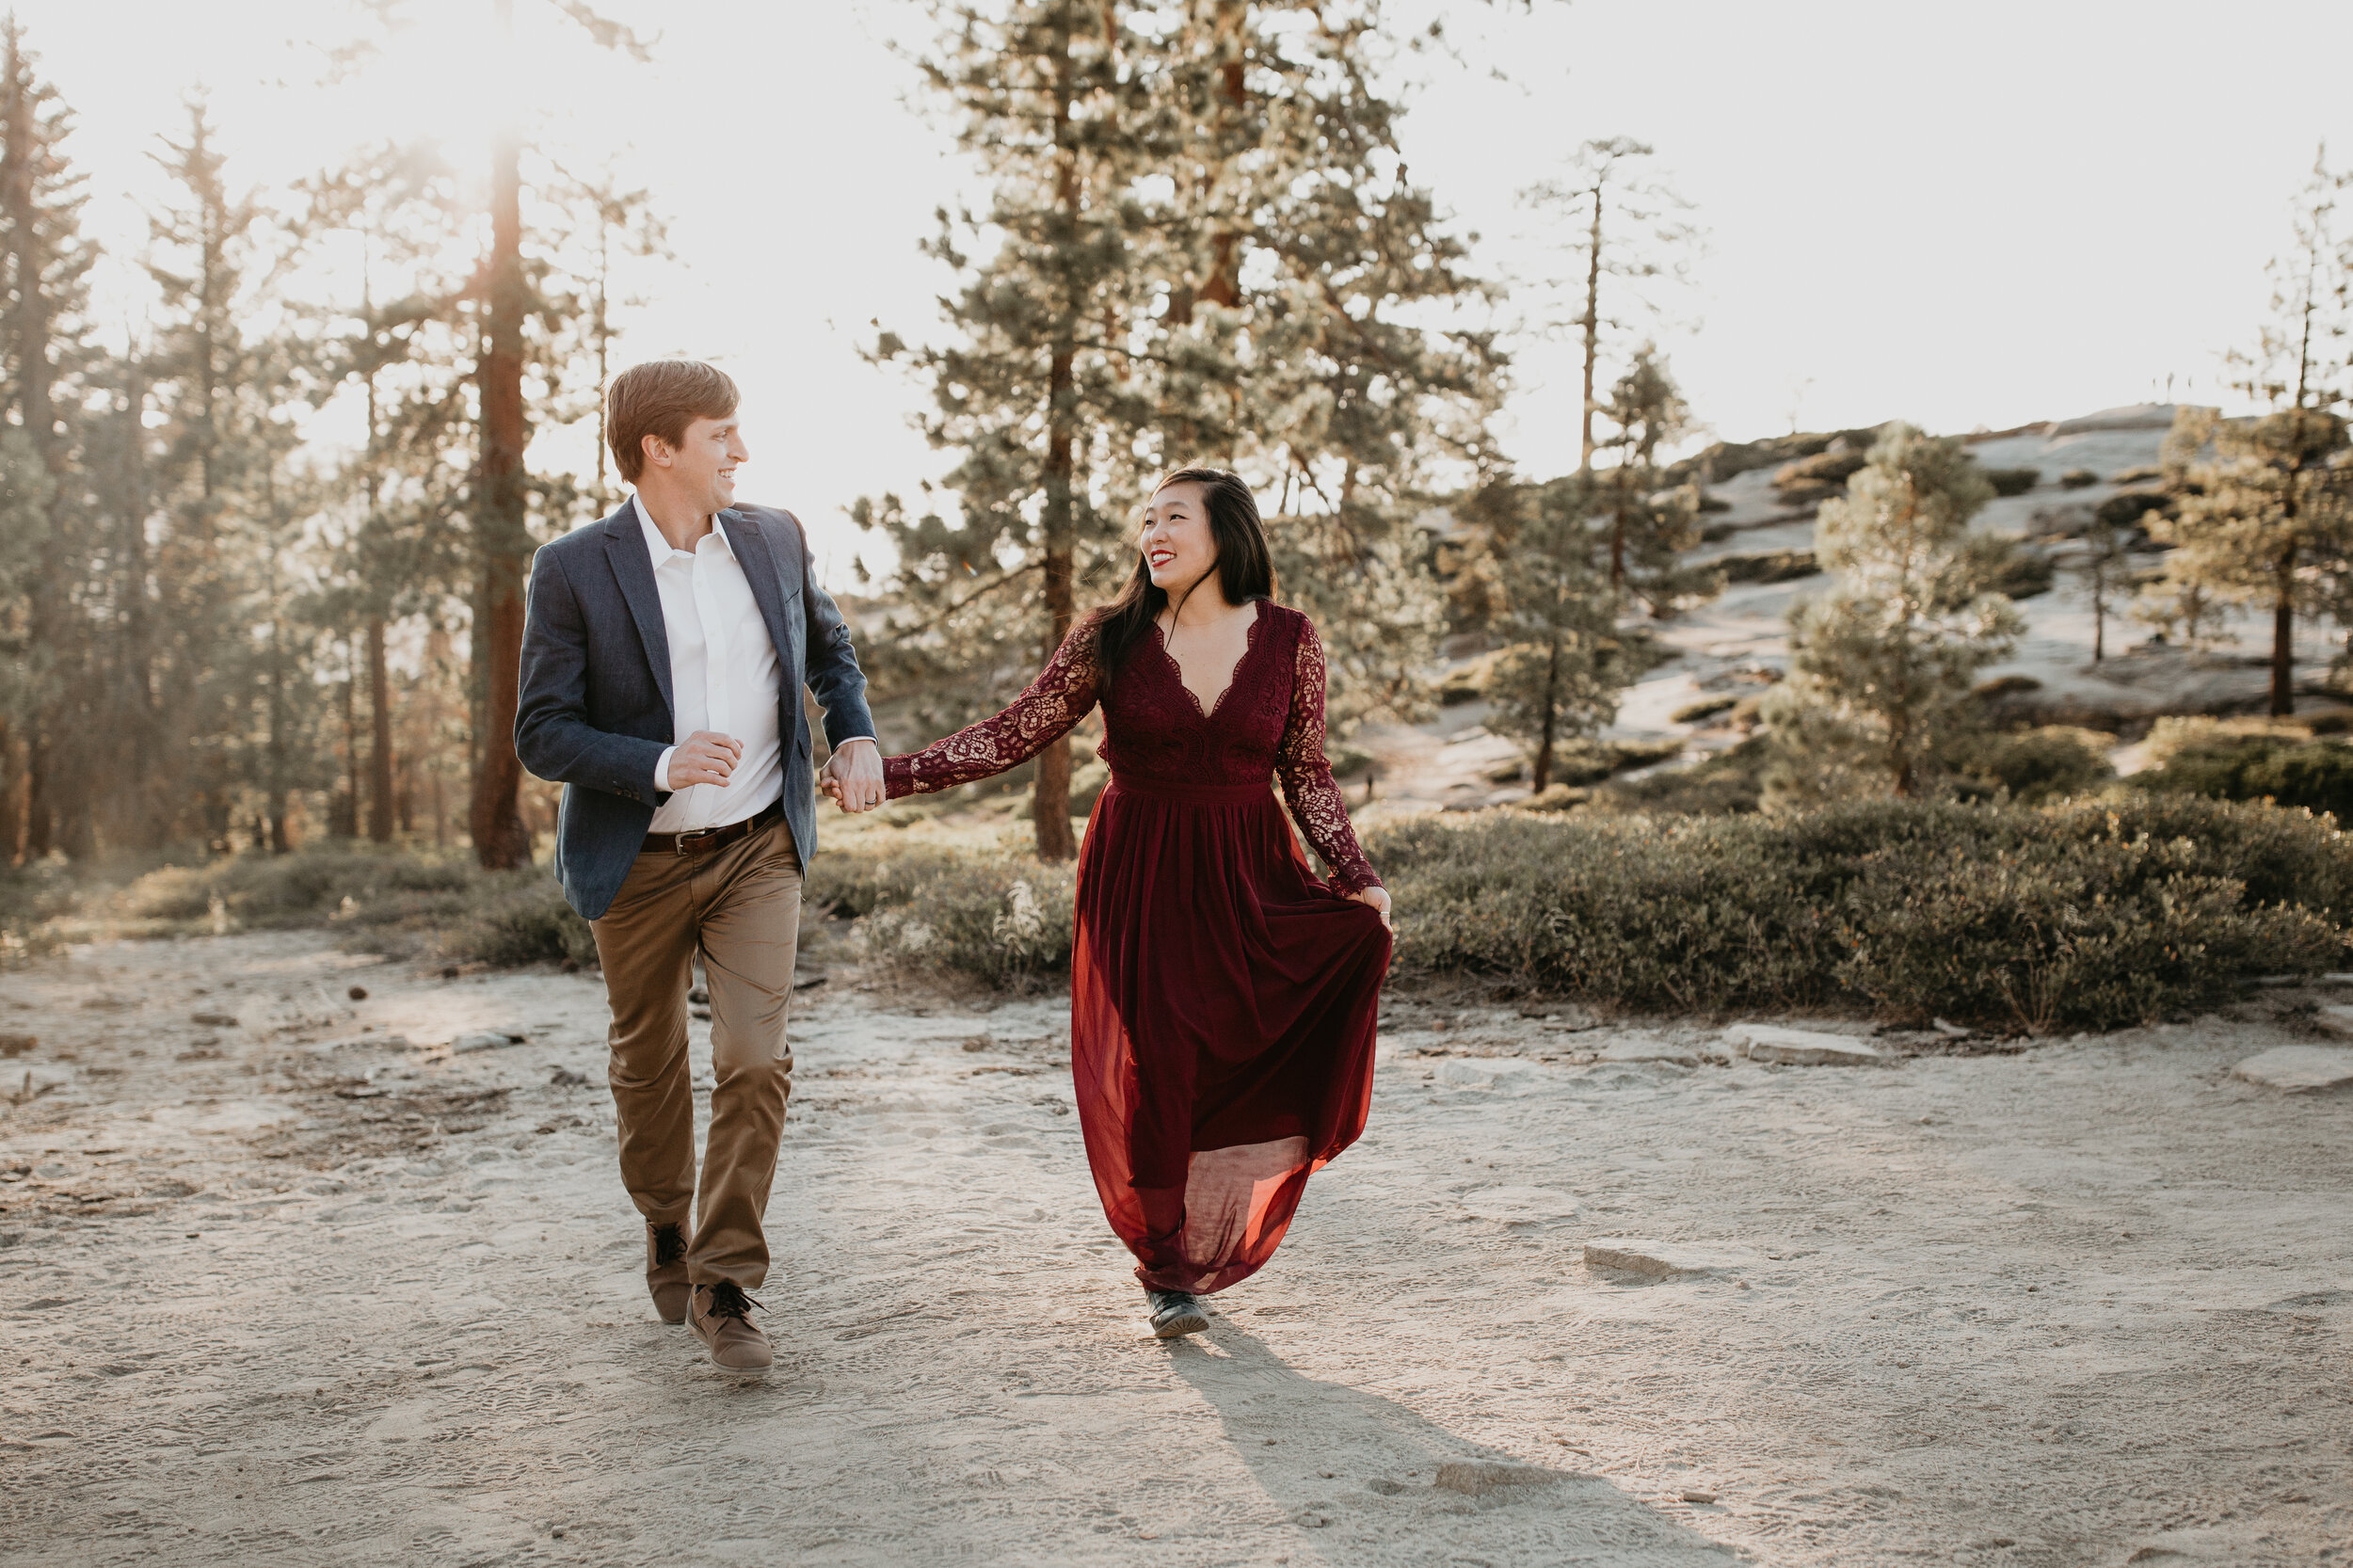 yosemite-national-park-couples-session-at-taft-point-and-yosemite-valley-yosemite-elopement-photographer-nicole-daacke-photography-124.jpg